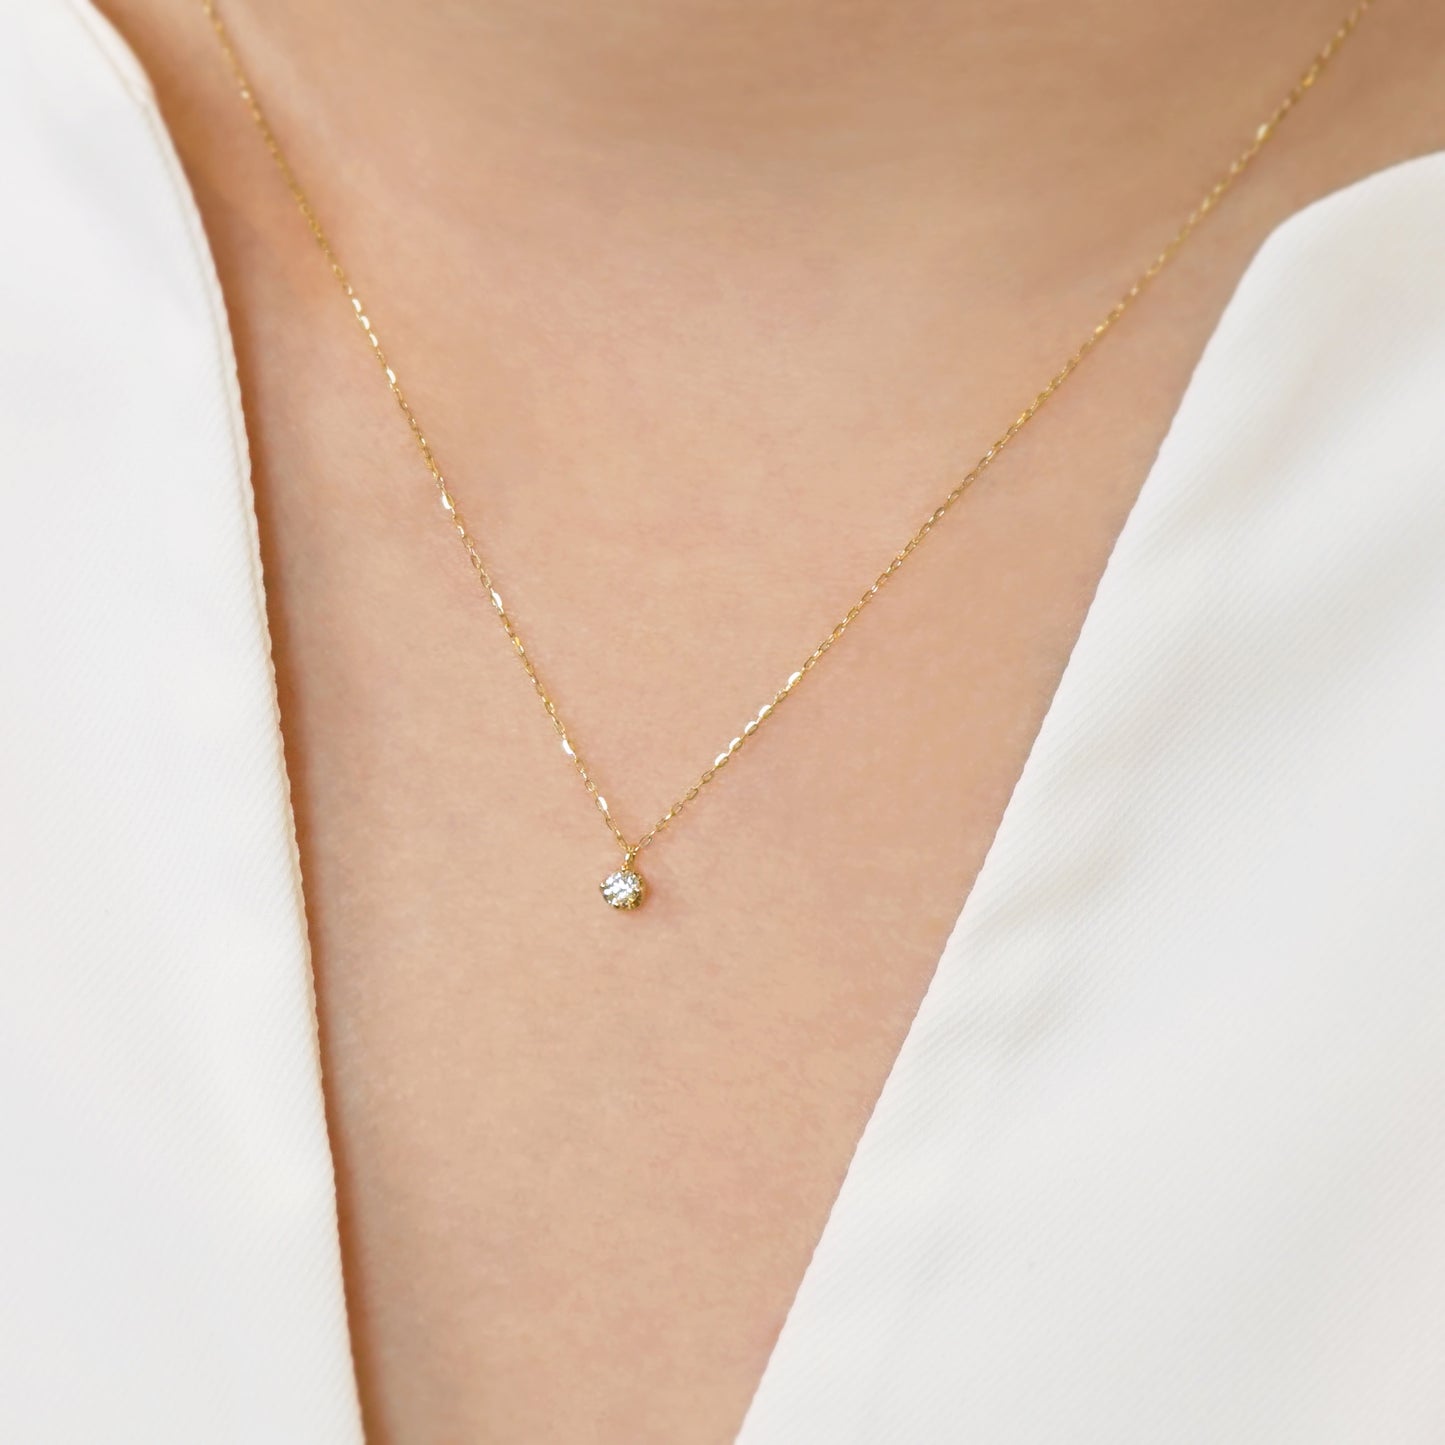 18K Yellow Gold Diamond Solitaire Necklace - Model Image